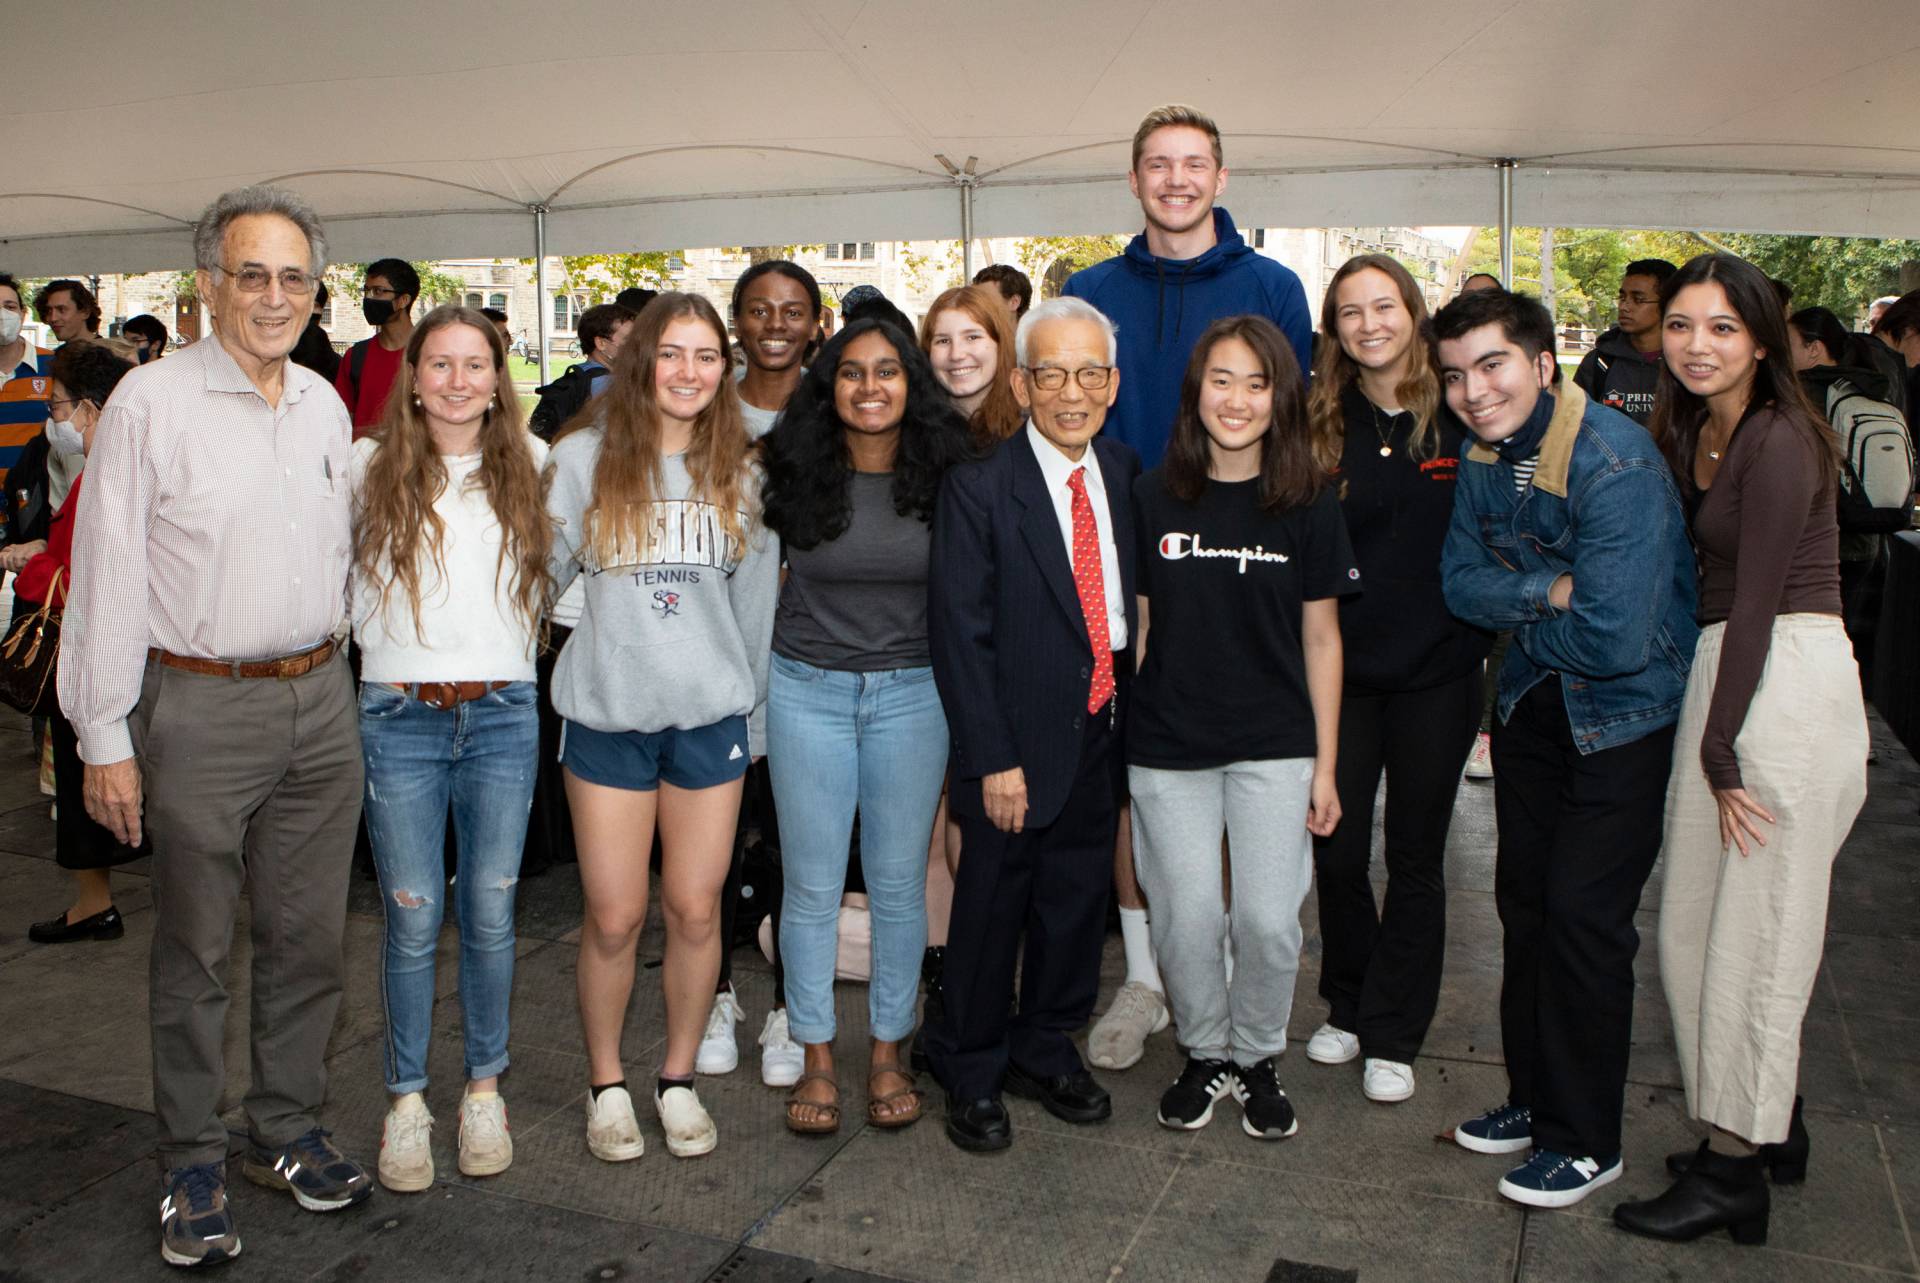 Syukuro Manabe poses with students and Robert Socolow